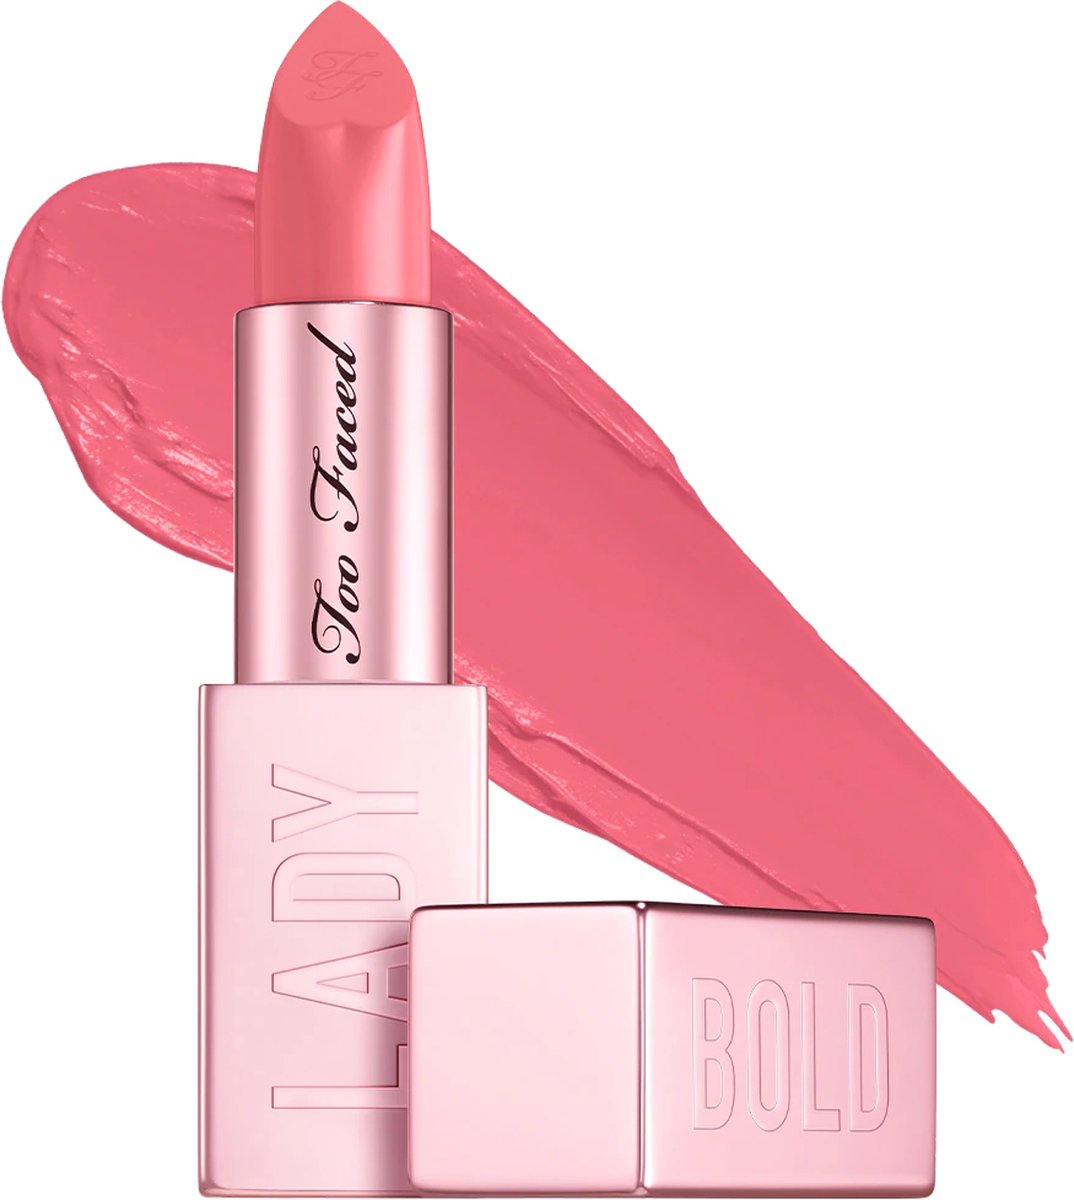 Too Faced Lady Bold Hype Woman Lipstick